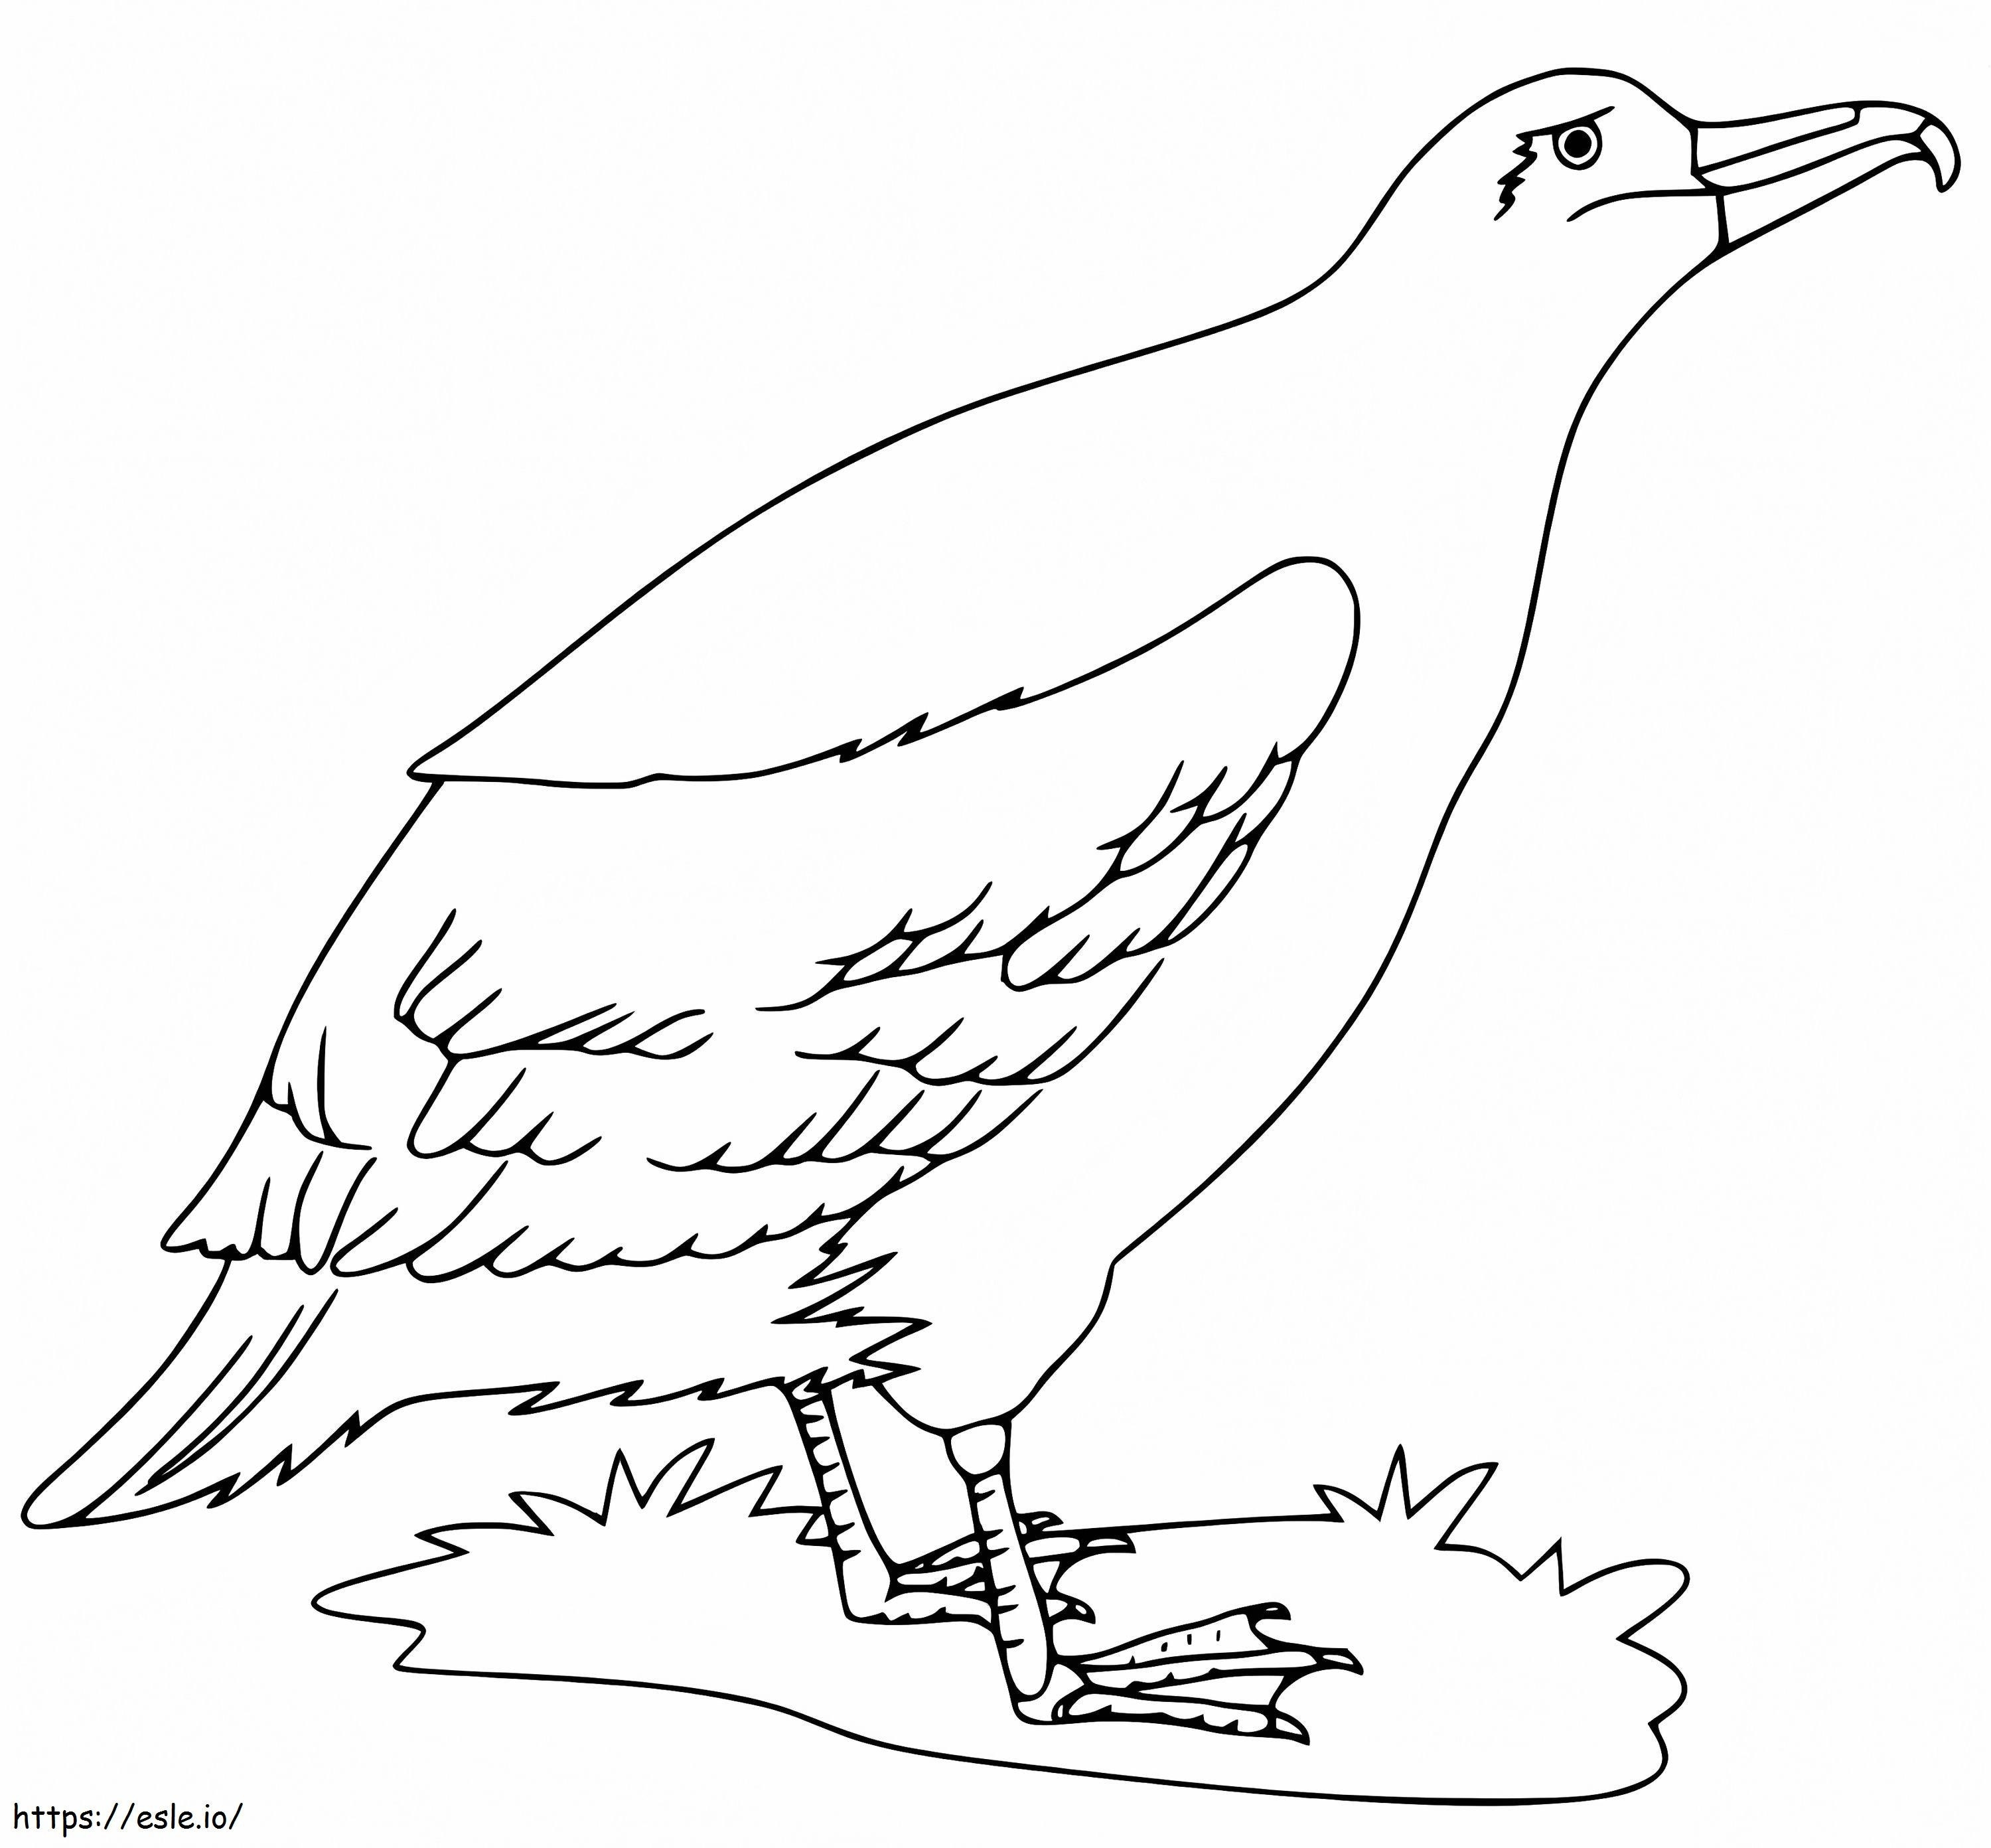 Albatross On Ground coloring page